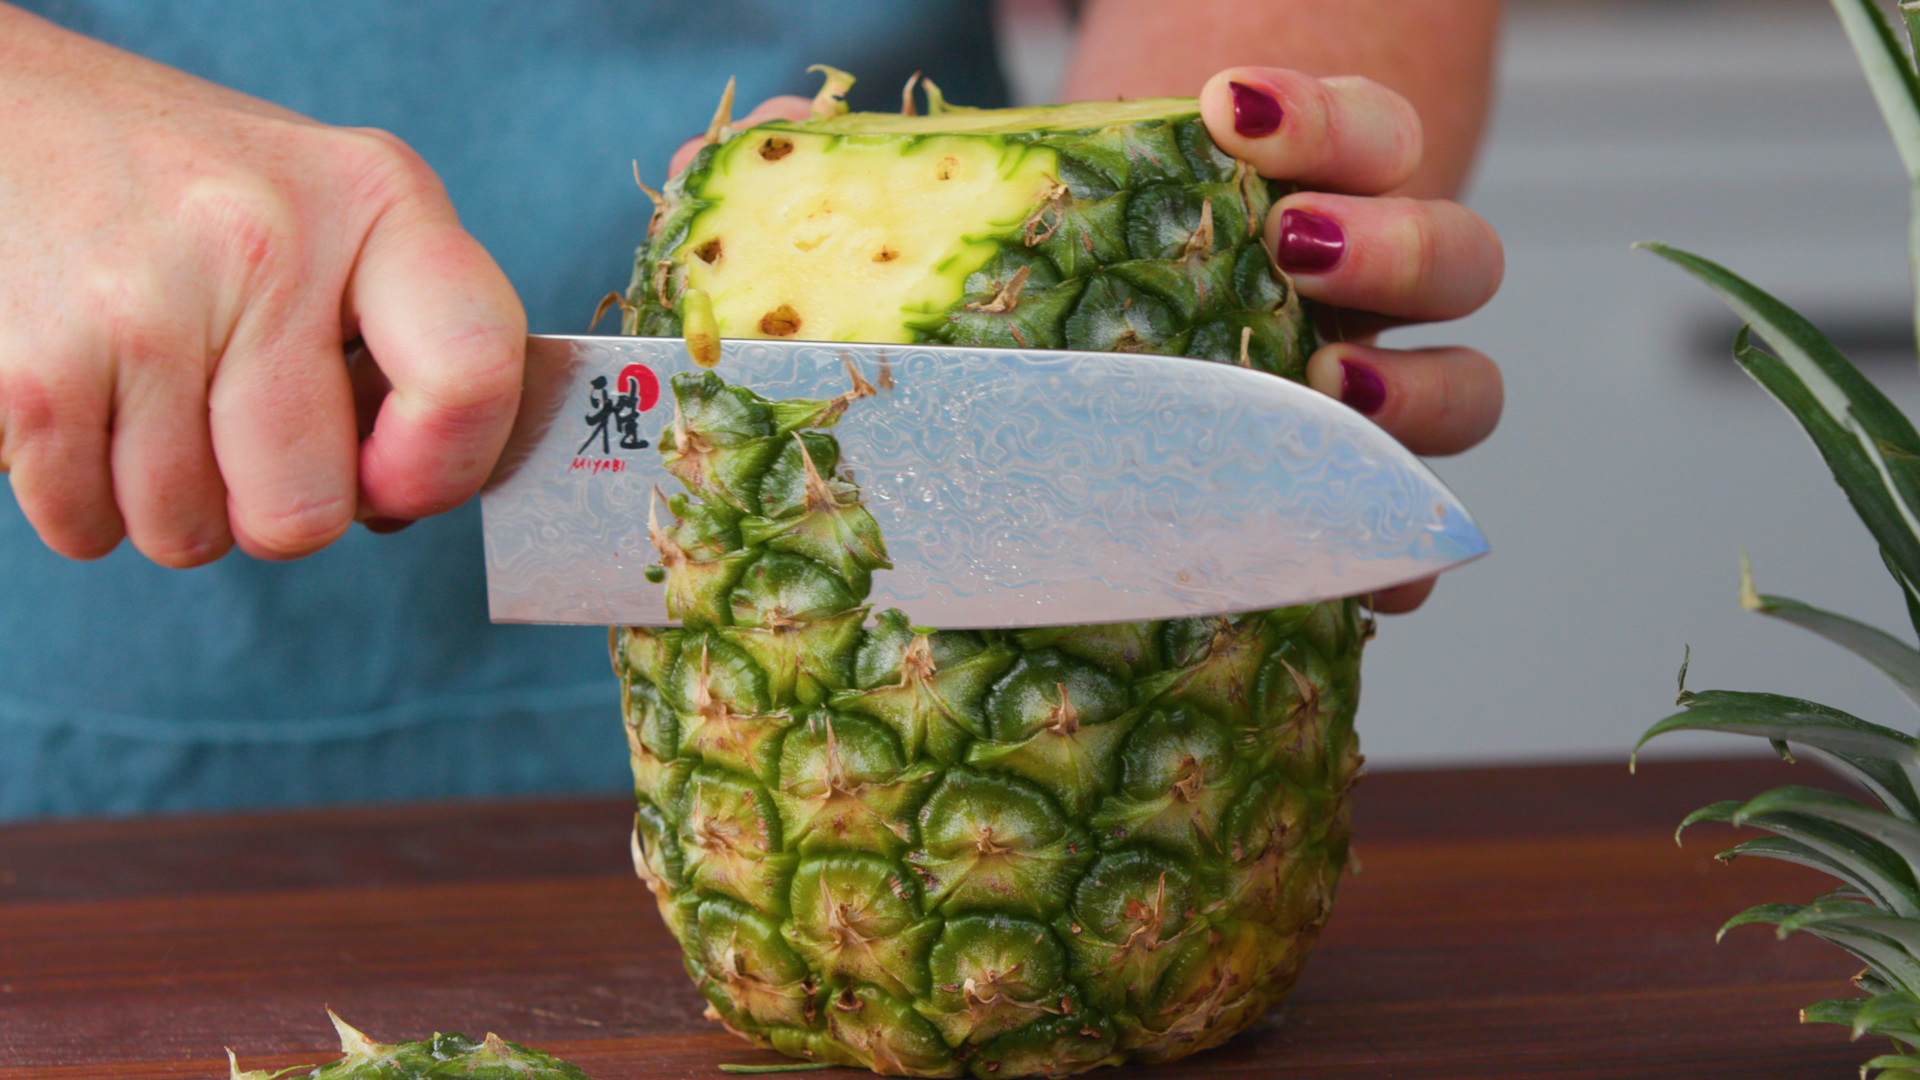 Peeling and Cutting a Pineapple